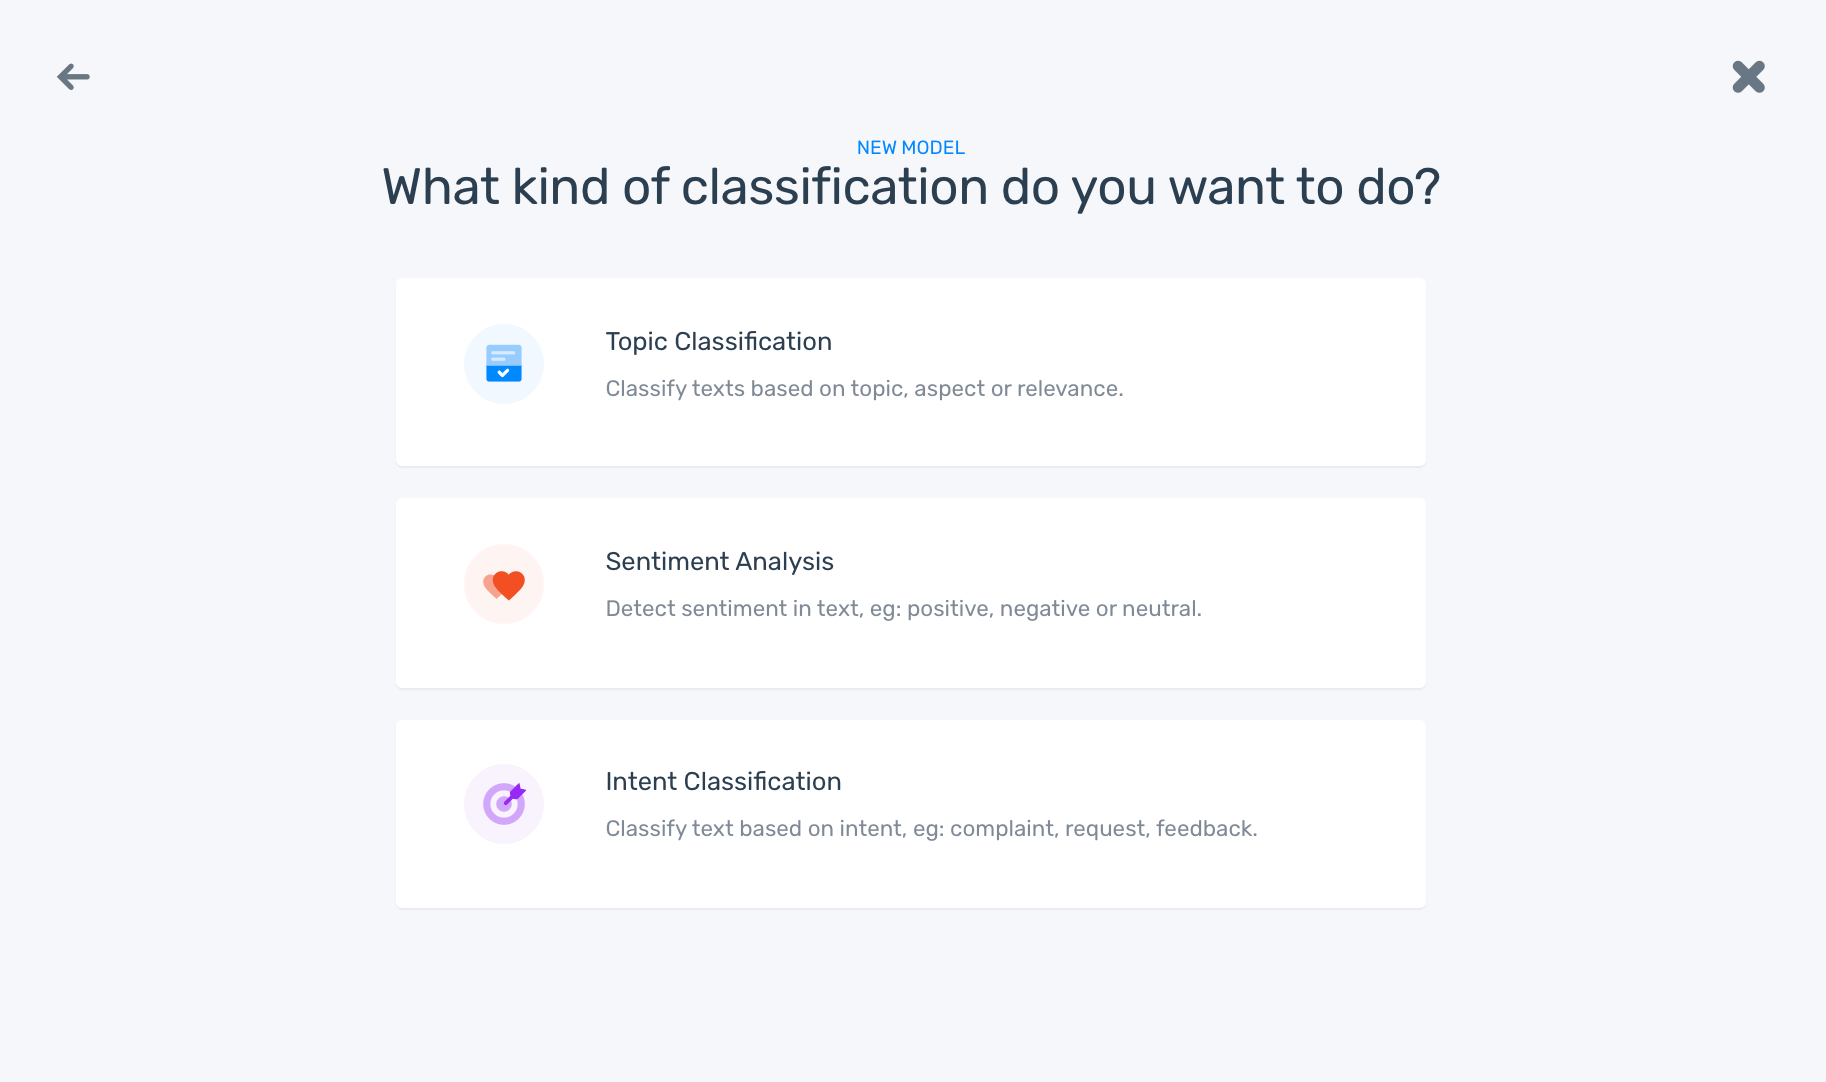 Classification options to choose from: topic, sentiment, and intent